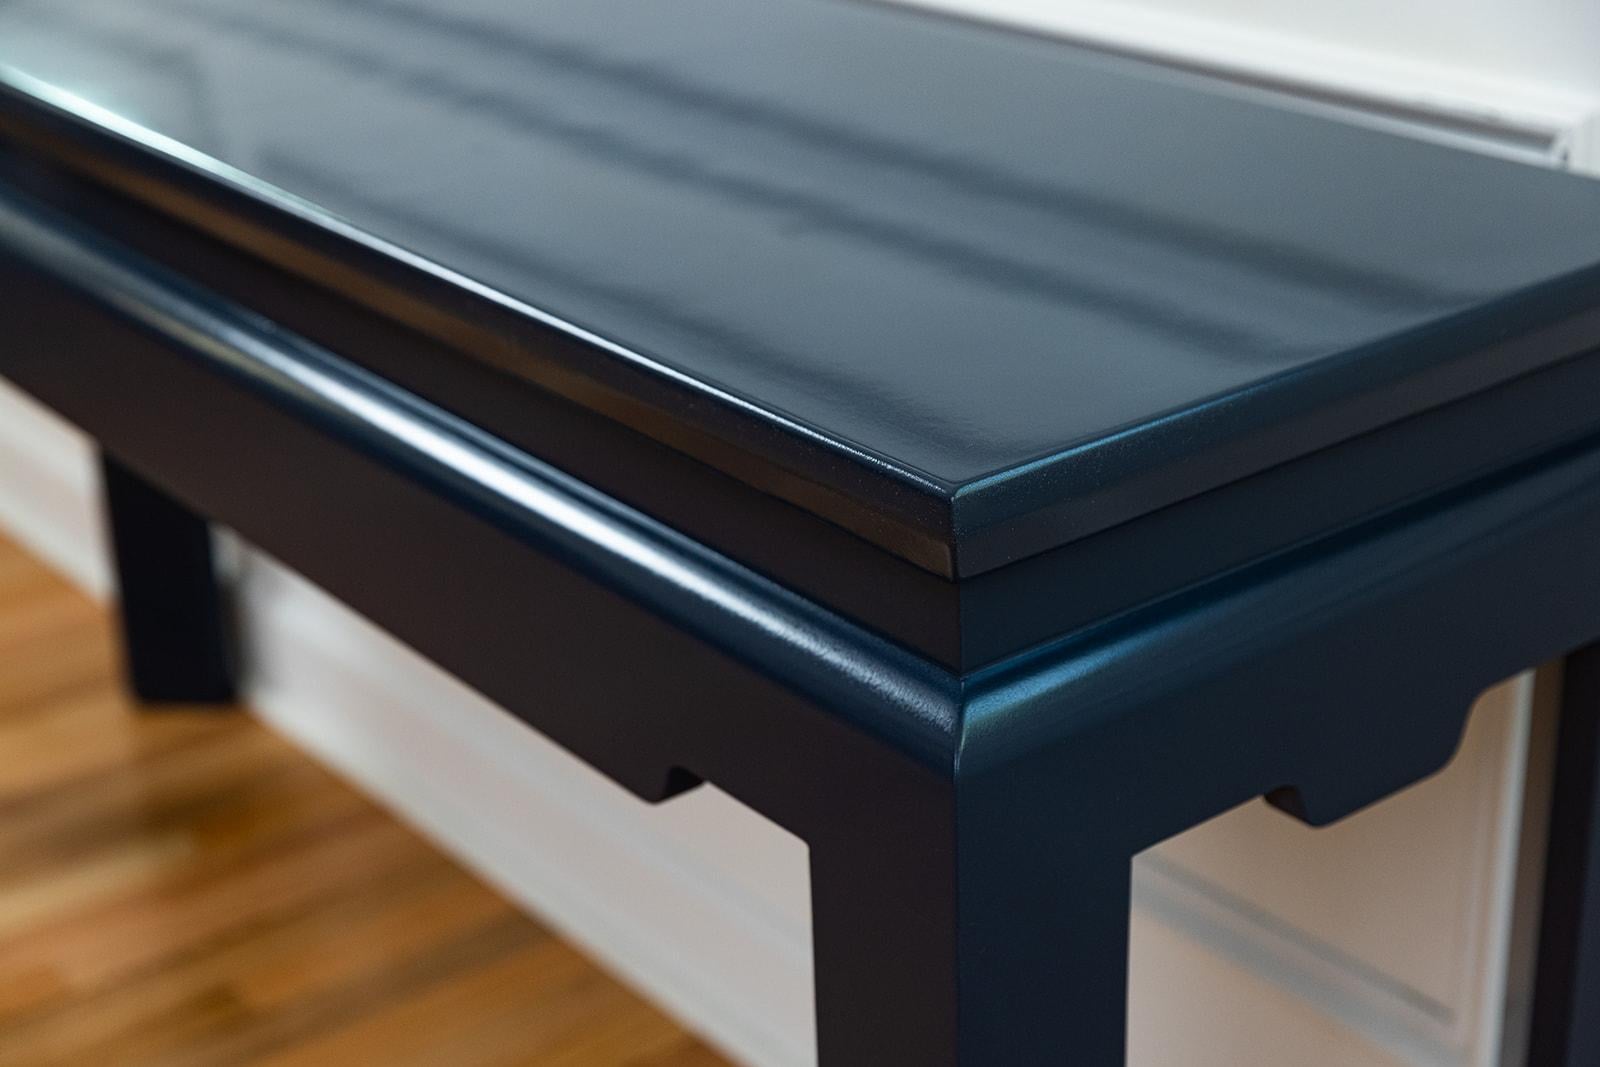 Maple Bespoke Modern Ming Console Table Custom Built and Lacquered Hale Navy Gloss For Sale